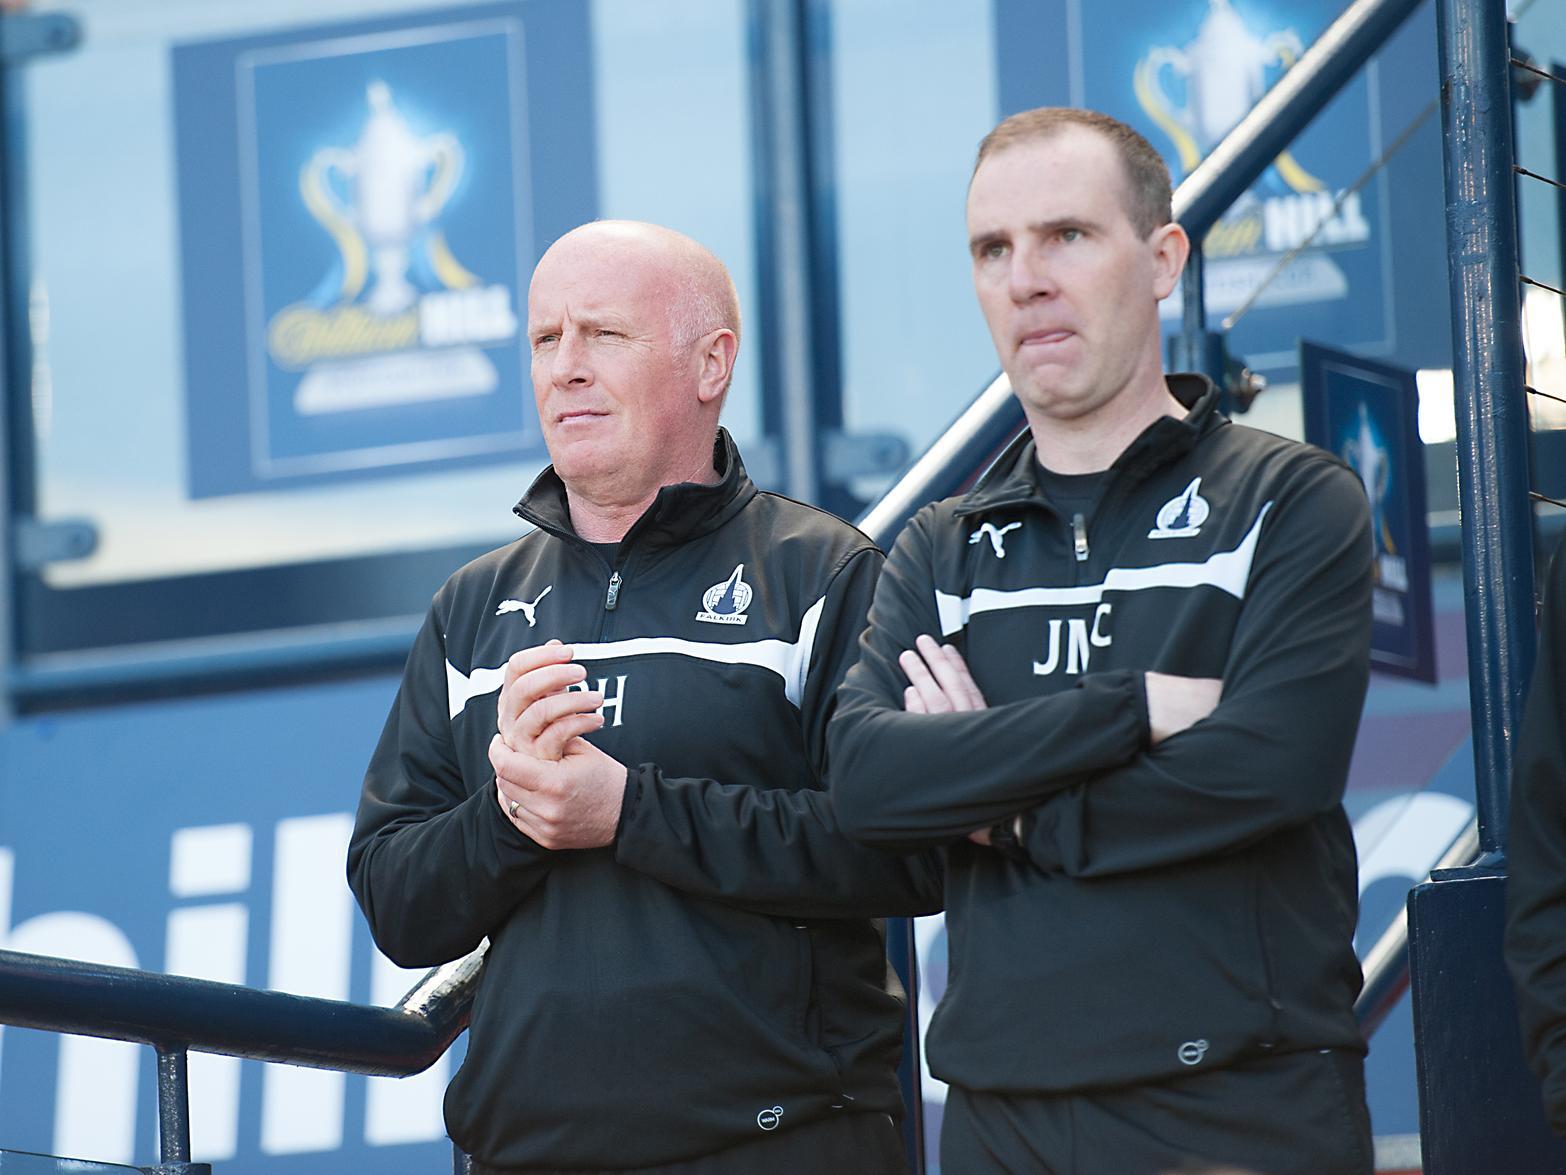 The longest serving manager of the decade, the 'Ginger God' took the Bairns to the Scottish Cup final and built a team that narrowly missed promotion from some of the toughest leagues in recent memory.